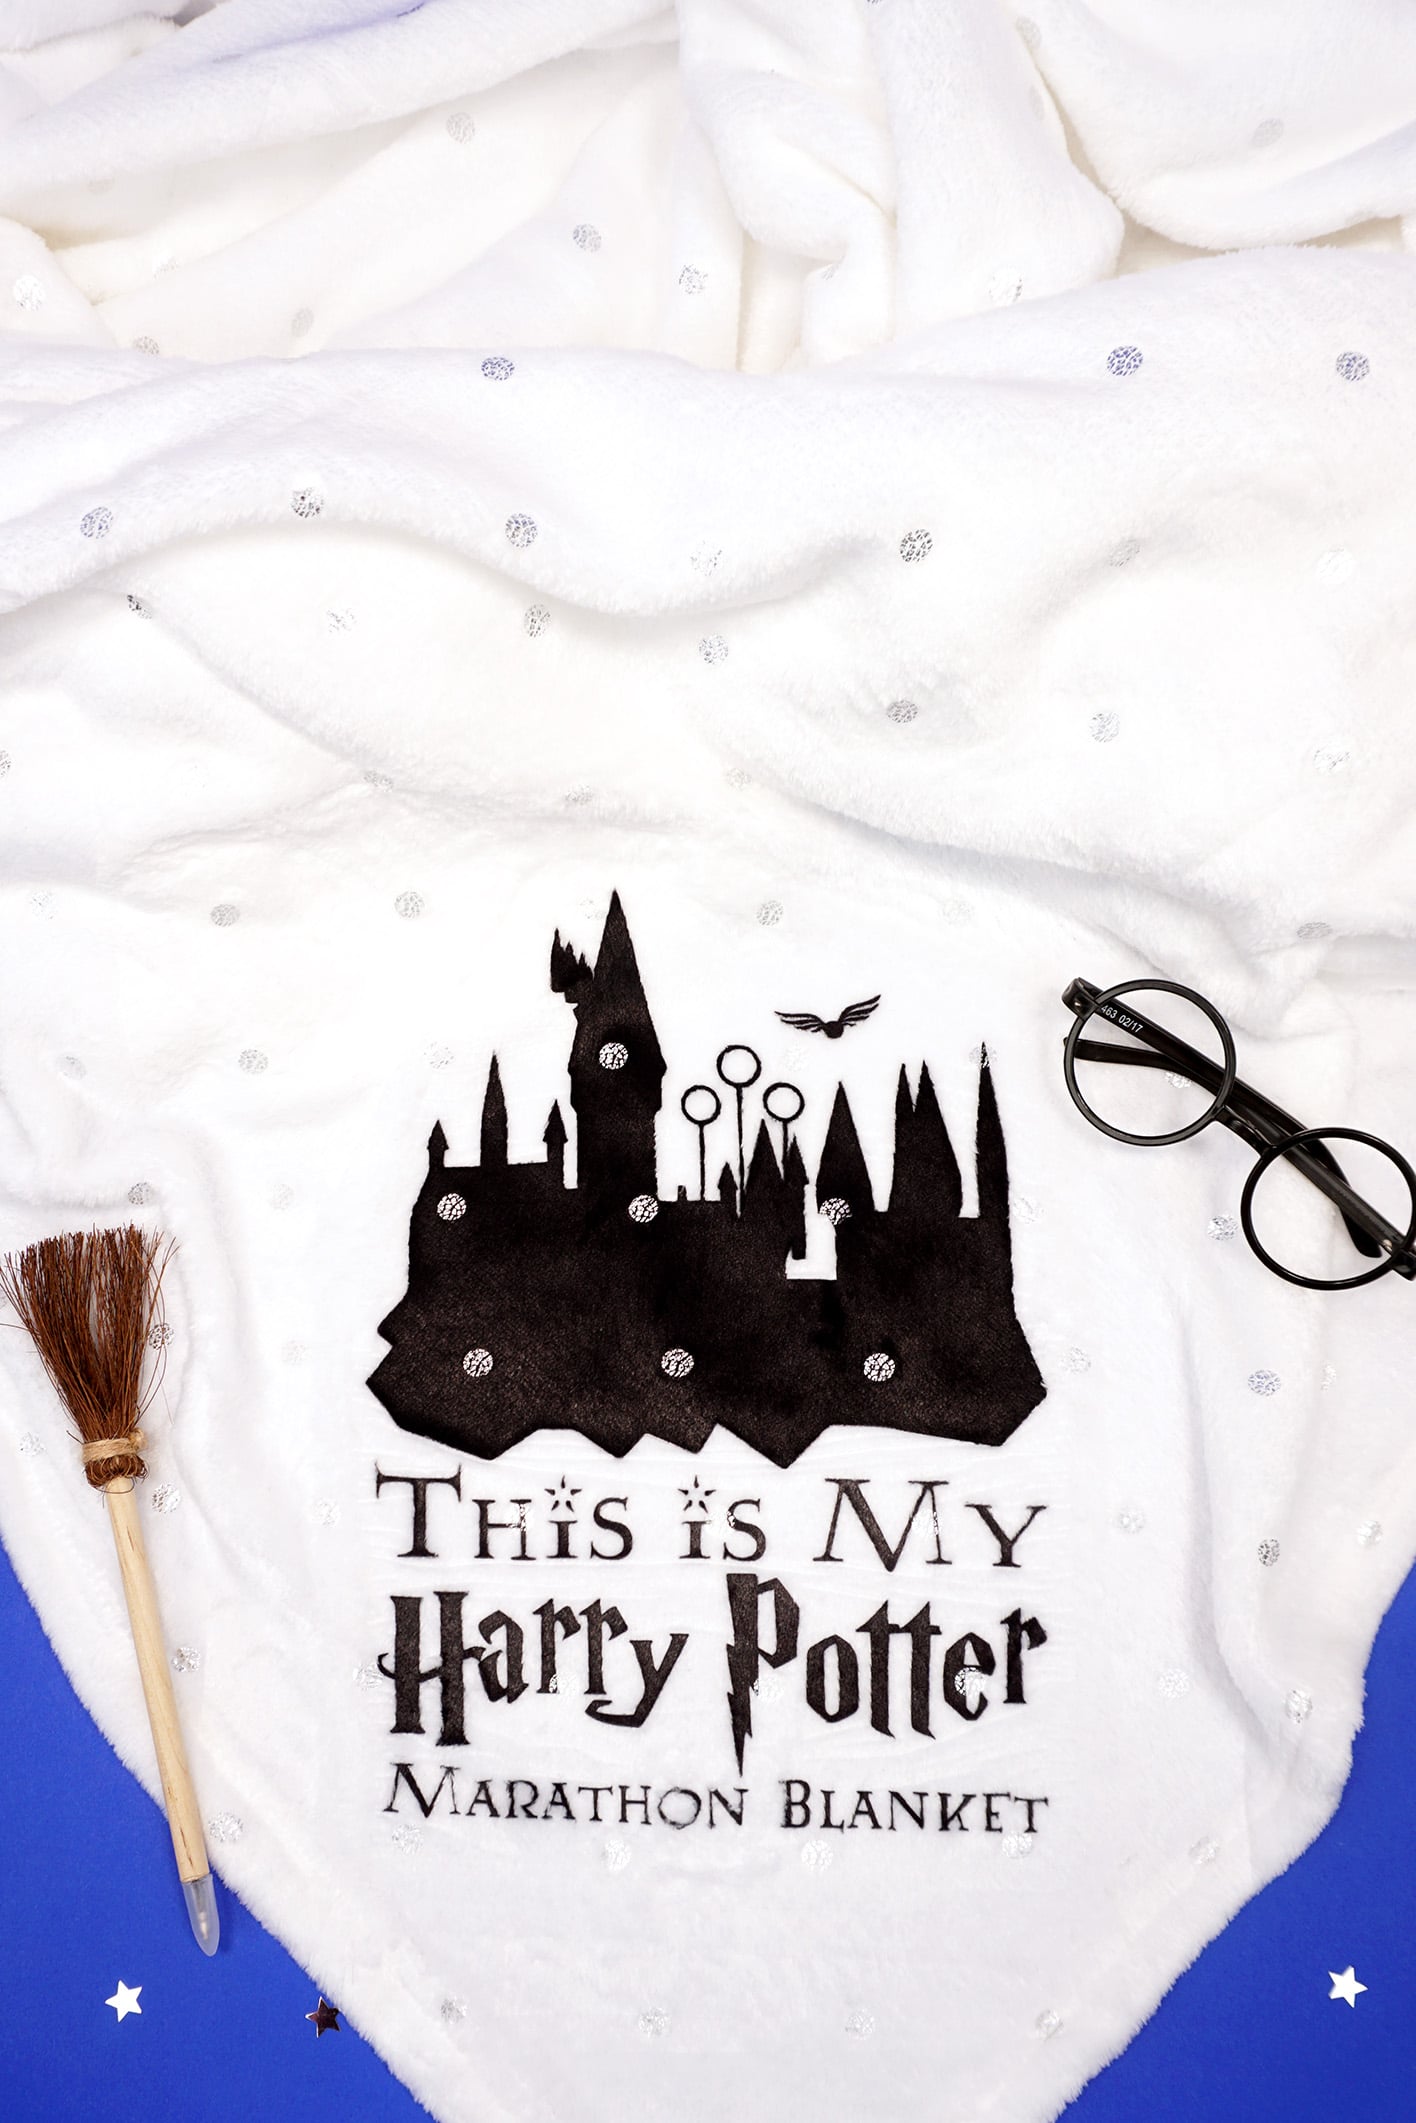 Free Harry Potter SVG Files for T-Shirts, Mugs & More